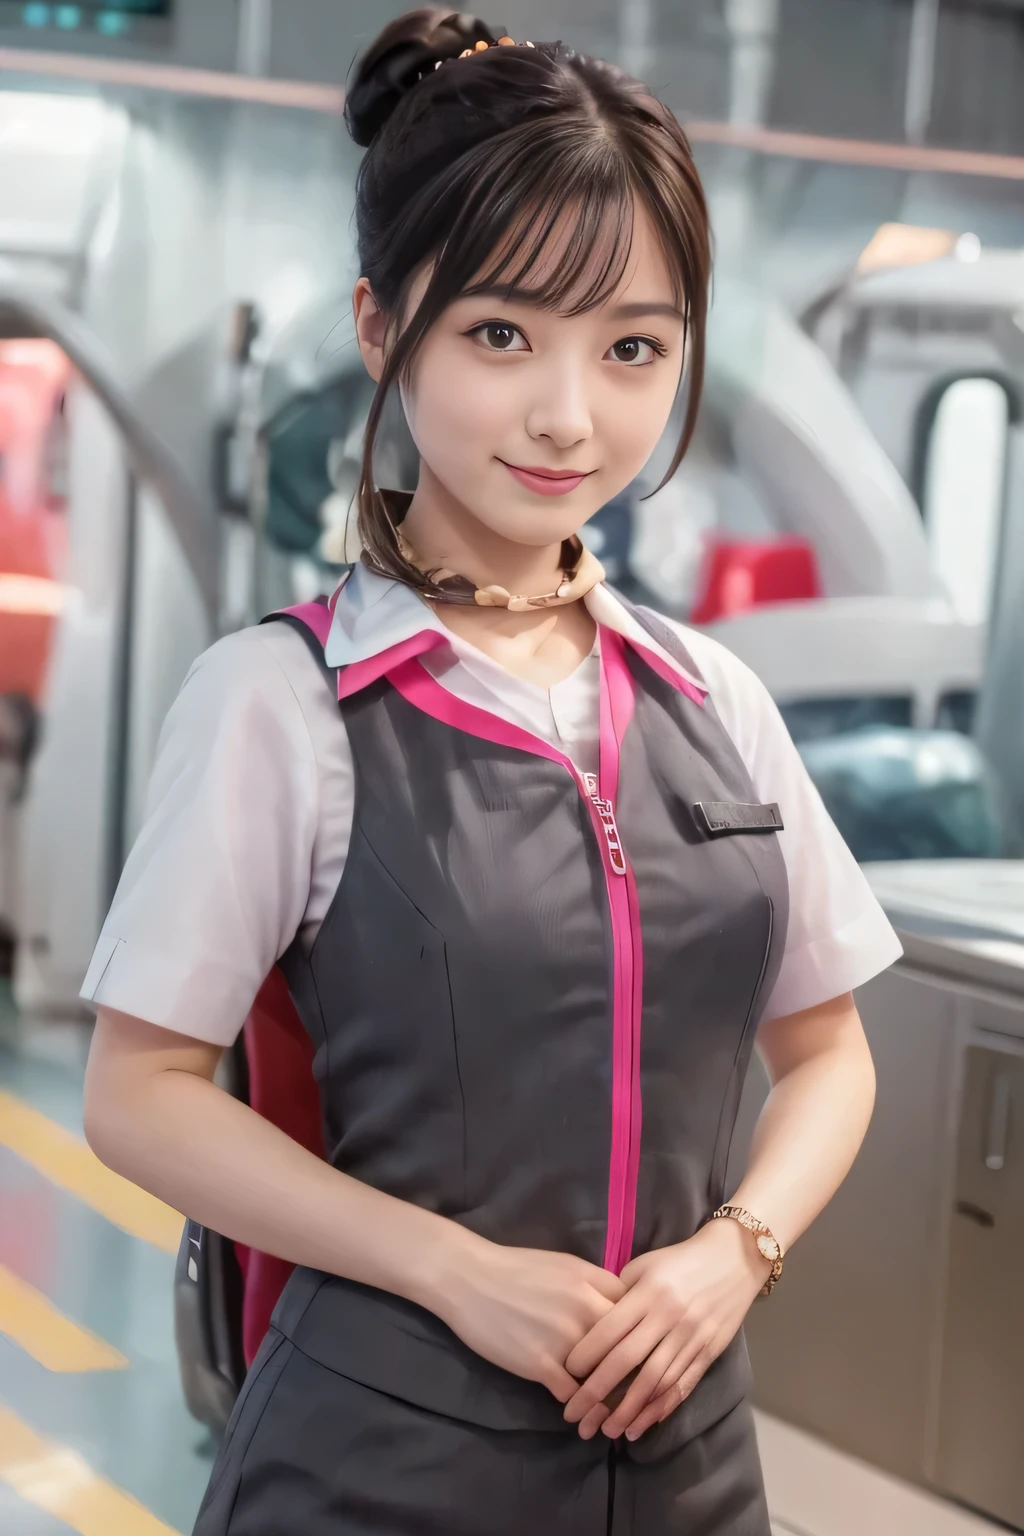 (masterpiece:1.2, highest quality:1.2), 32K HDR, High resolution, (alone、1 girl)、（At the station platform、Professional Lighting）、Background of an empty station platform、（Realistic style of JR Gran Class crew wearing uniform）、Short sleeve blouse、a scarf around the neck、（JR Gran Class flight attendant uniform with pink parts on the skirt sleeves）、（JR Gran Class flight attendant uniform with pink line on front zipper of vest）、Dark brown hair、（Hair tied up、Hair Bun、Hair Bun）、Dark brown hair、Long Shot、Big Breasts、（（Great hands：2.0）），（（Harmonious body proportions：1.5）），（（Normal limbs：2.0）），（（Normal finger：2.0）），（（Delicate eyes：2.0）），（（Normal eyes：2.0））)、Big Breasts、Luxury Necklace、smile、Beautiful standing posture,Place your hands around your stomach